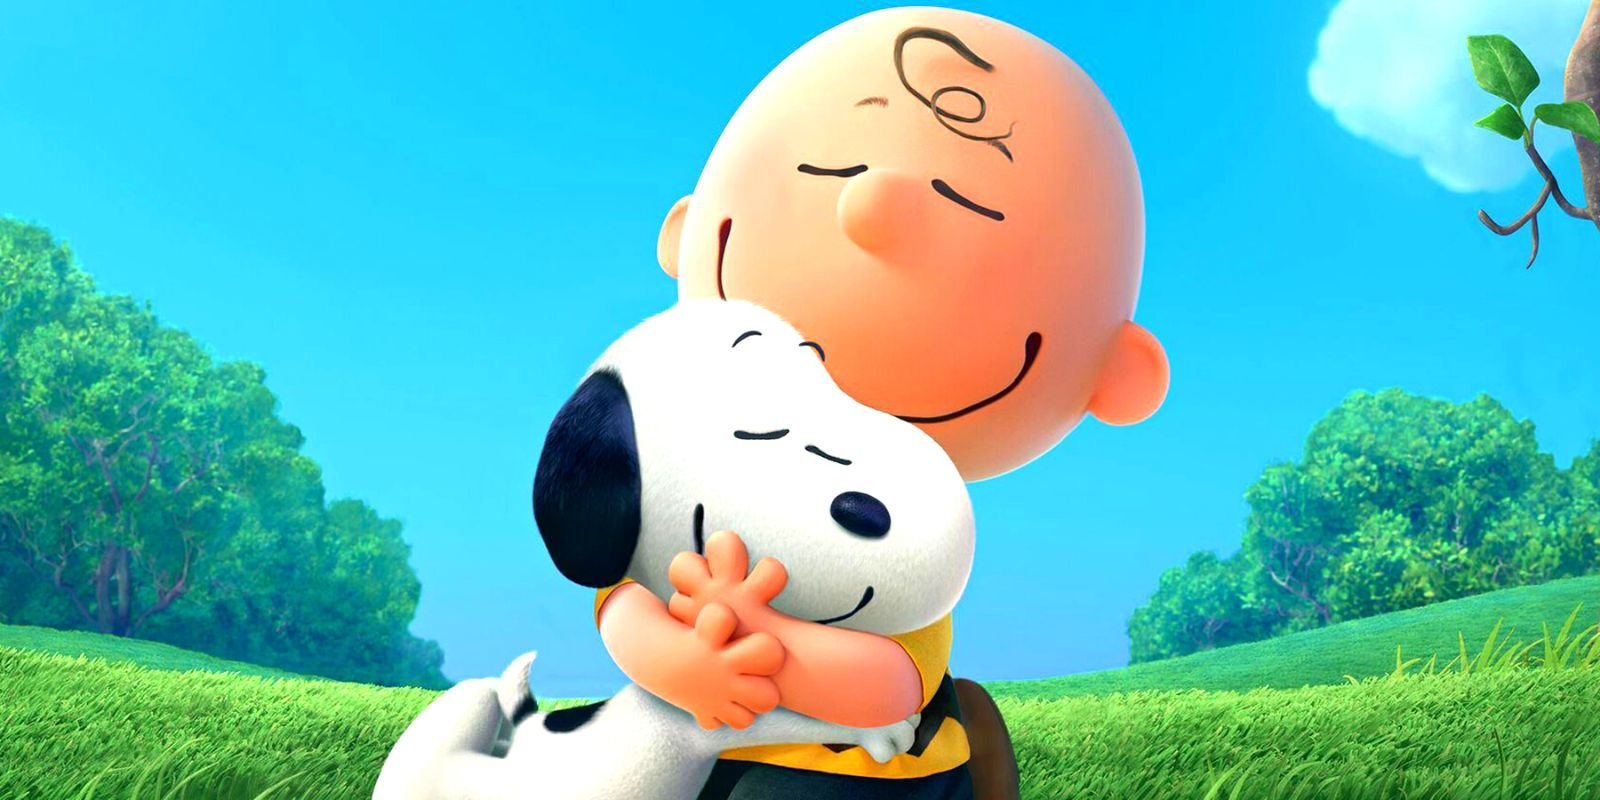 Charlie Brown and Snoopy hugging in a peaceful field